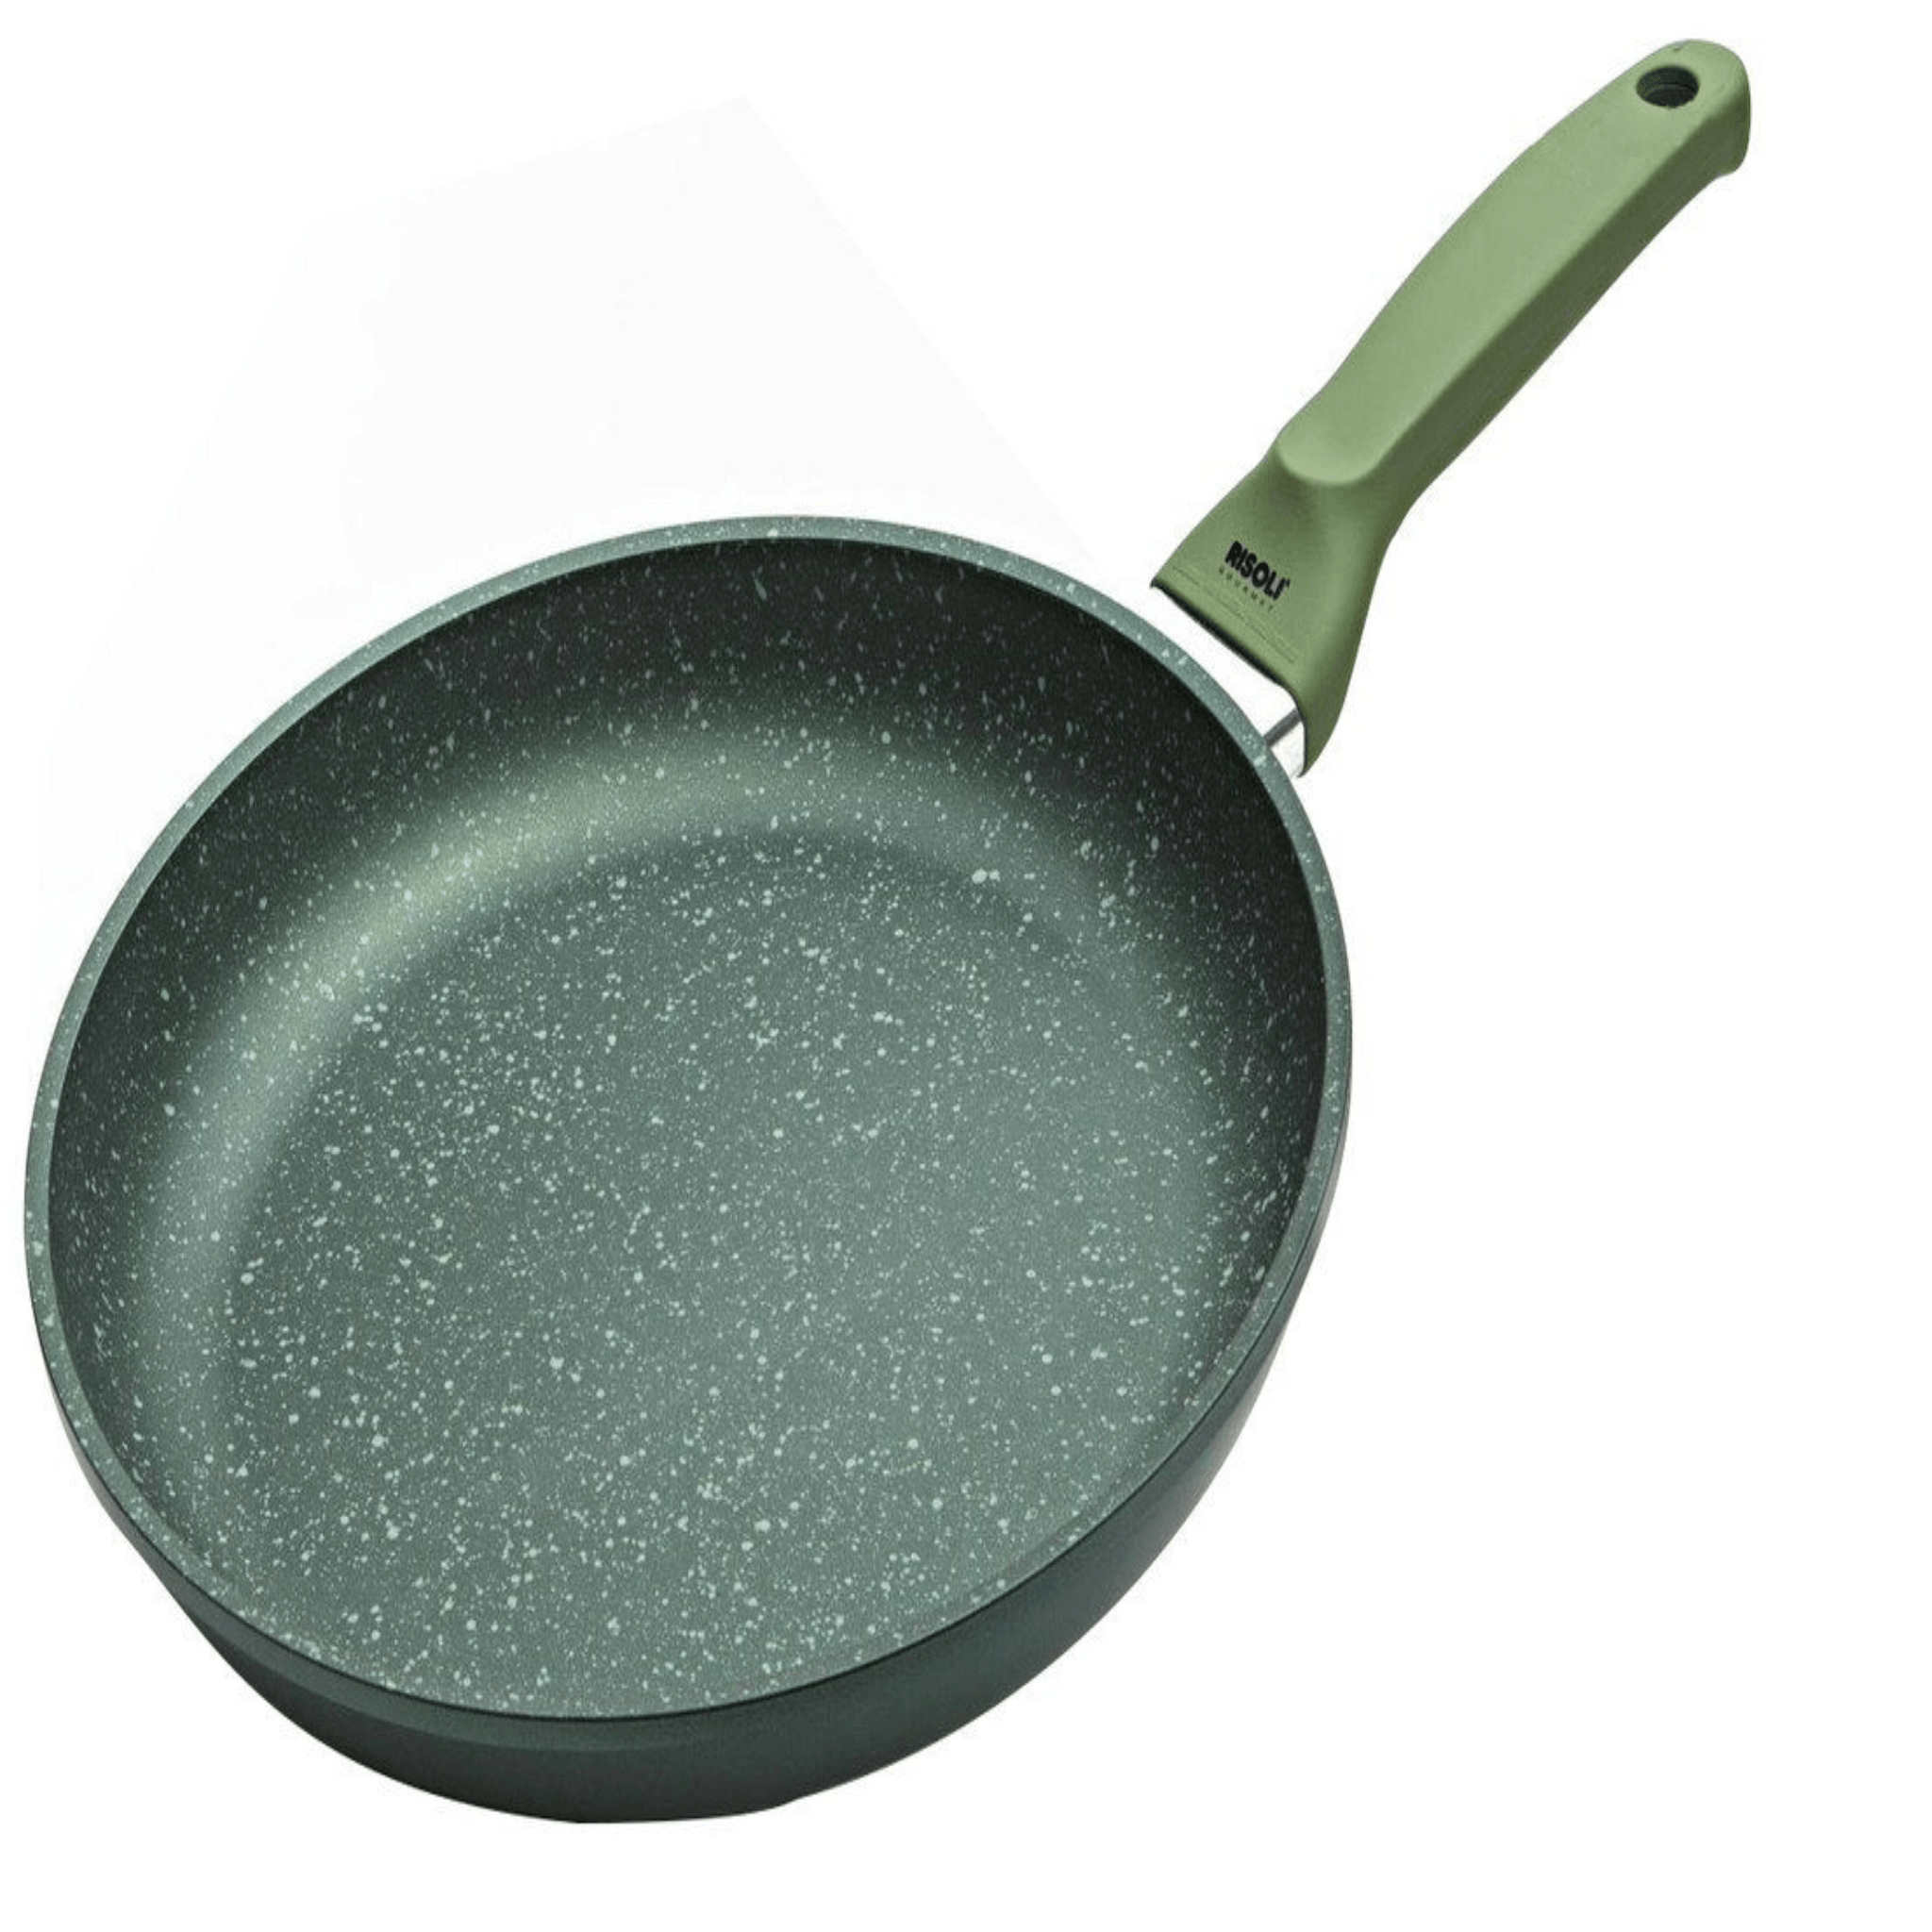 Risoli - Dr.Green Frypan with Handle - Green - Die Cast Aluminum - 20cm - 44000360